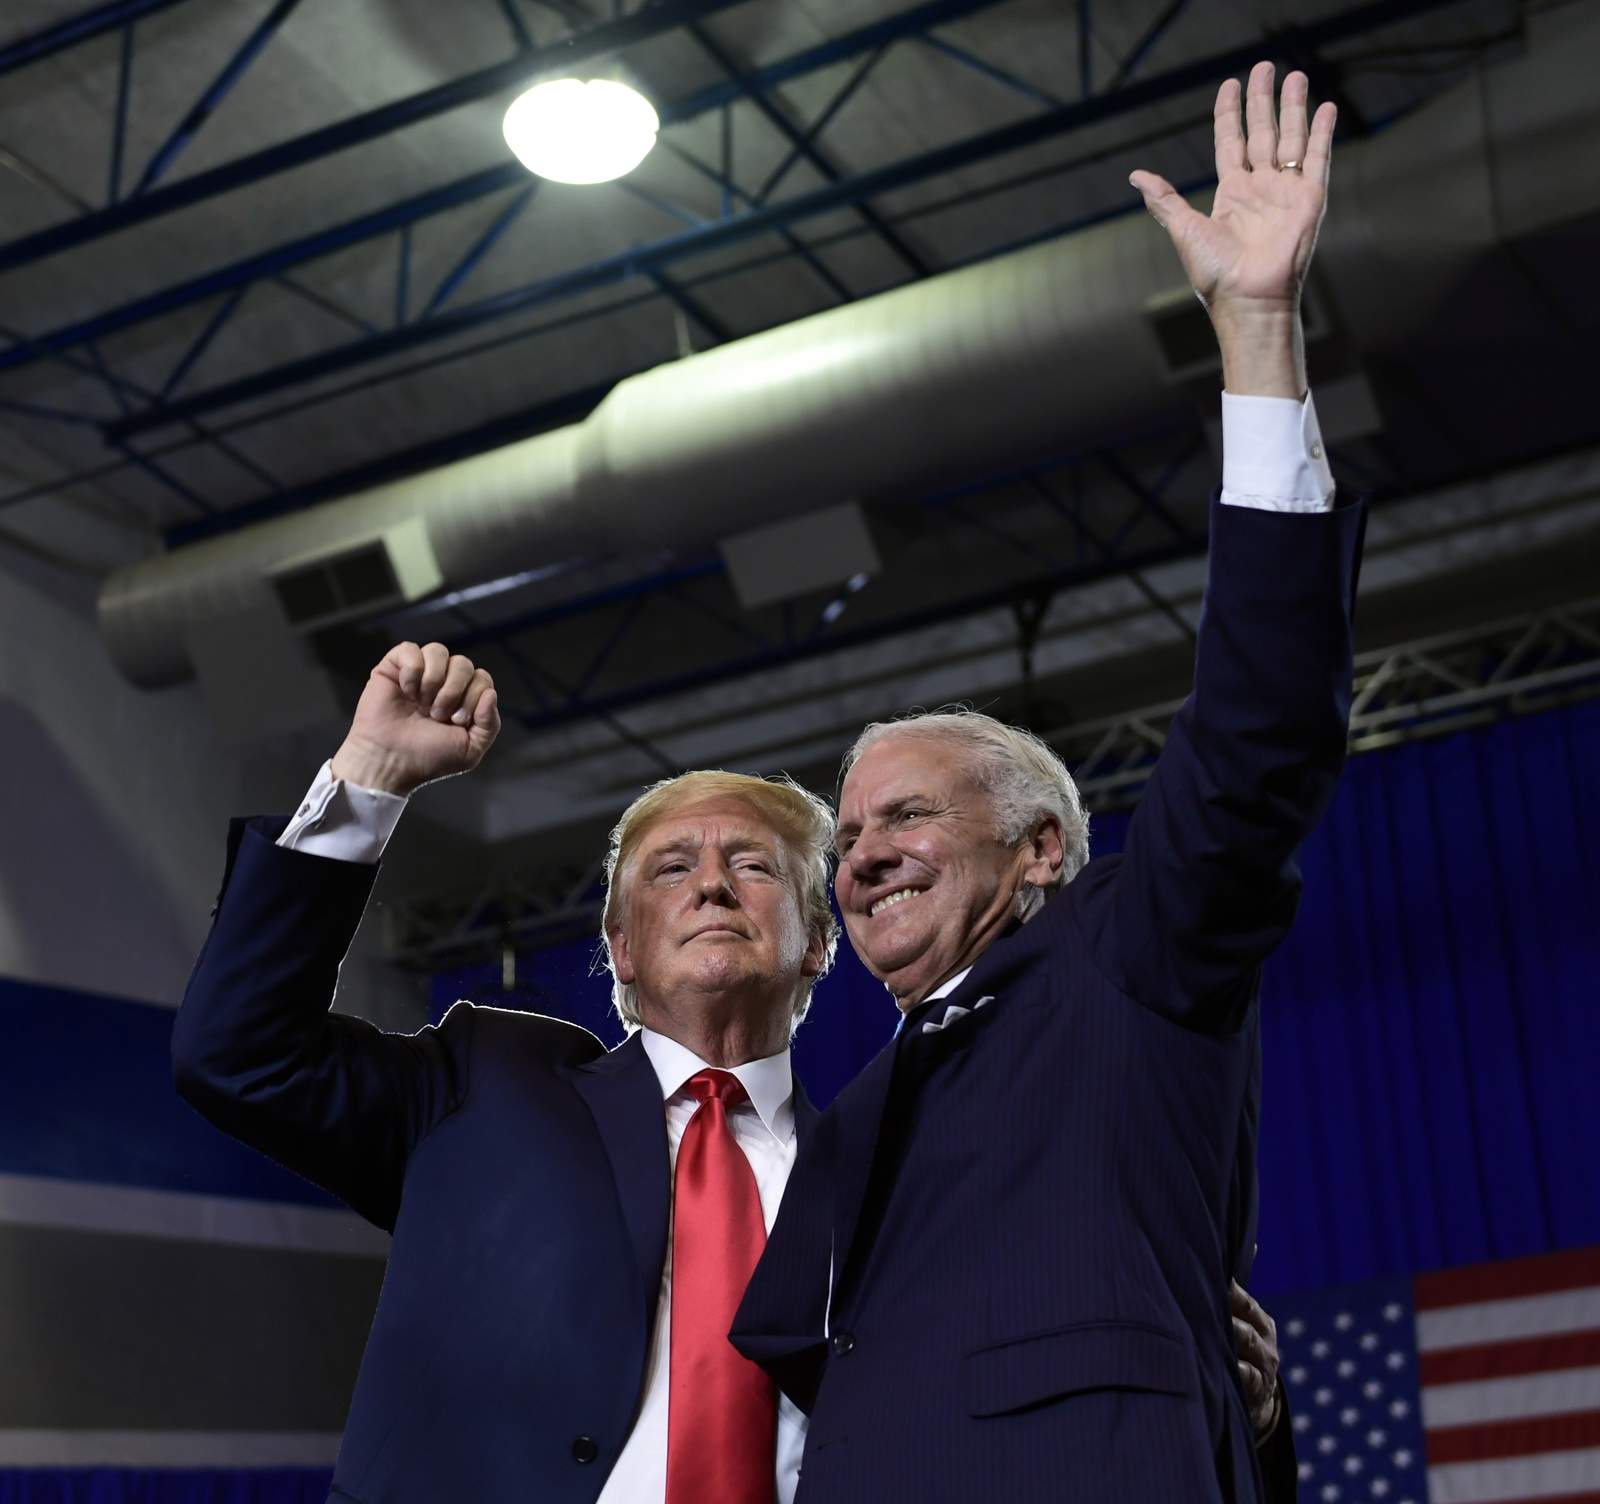 Trump offers early endorsement for loyal SC governor